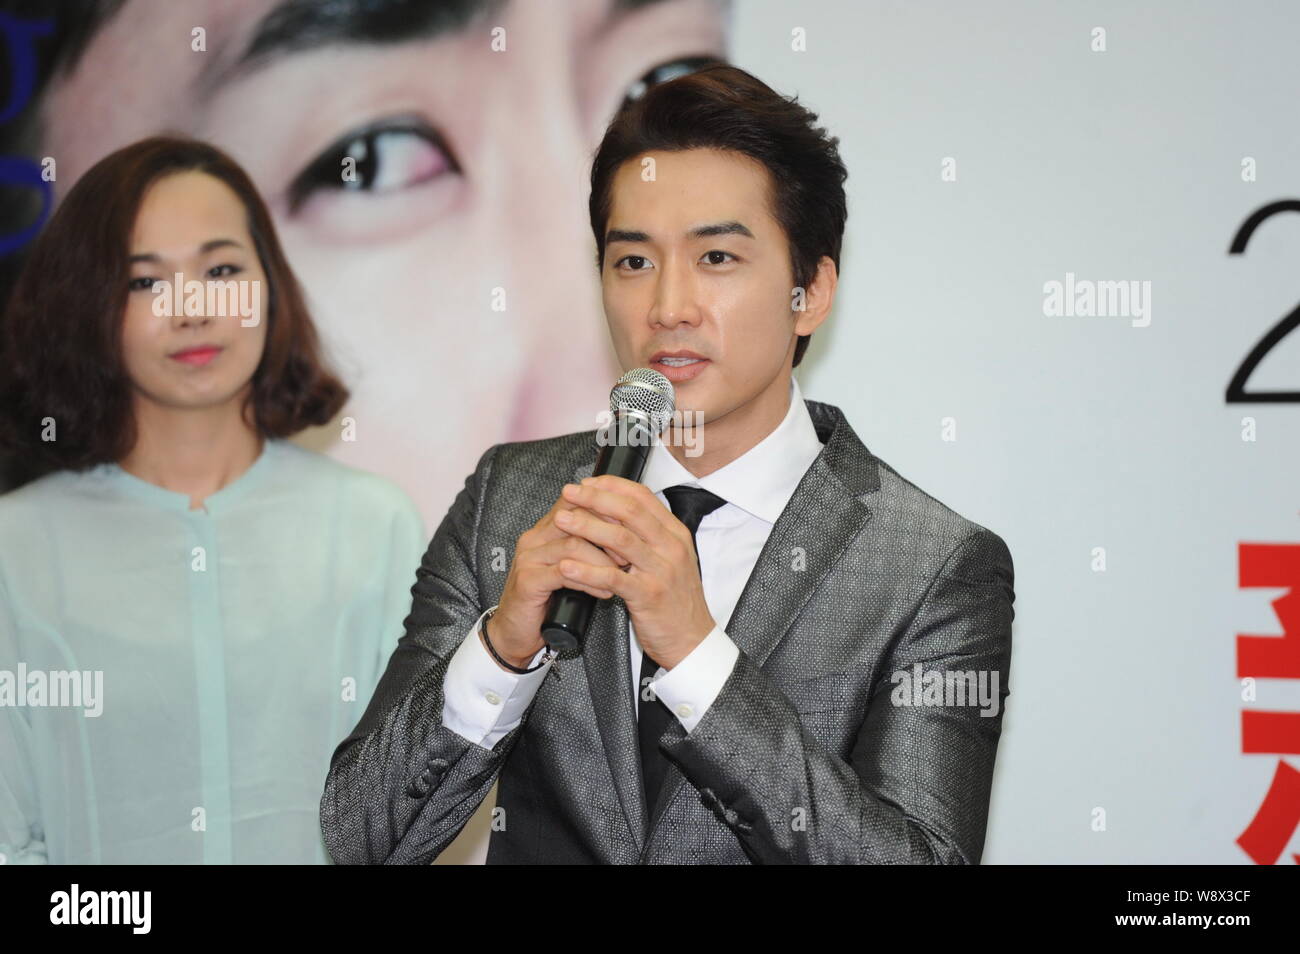 South Korean actor Song Seung-heon speaks at a fan meeting in Beijing, China, 22 August 2014. Stock Photo